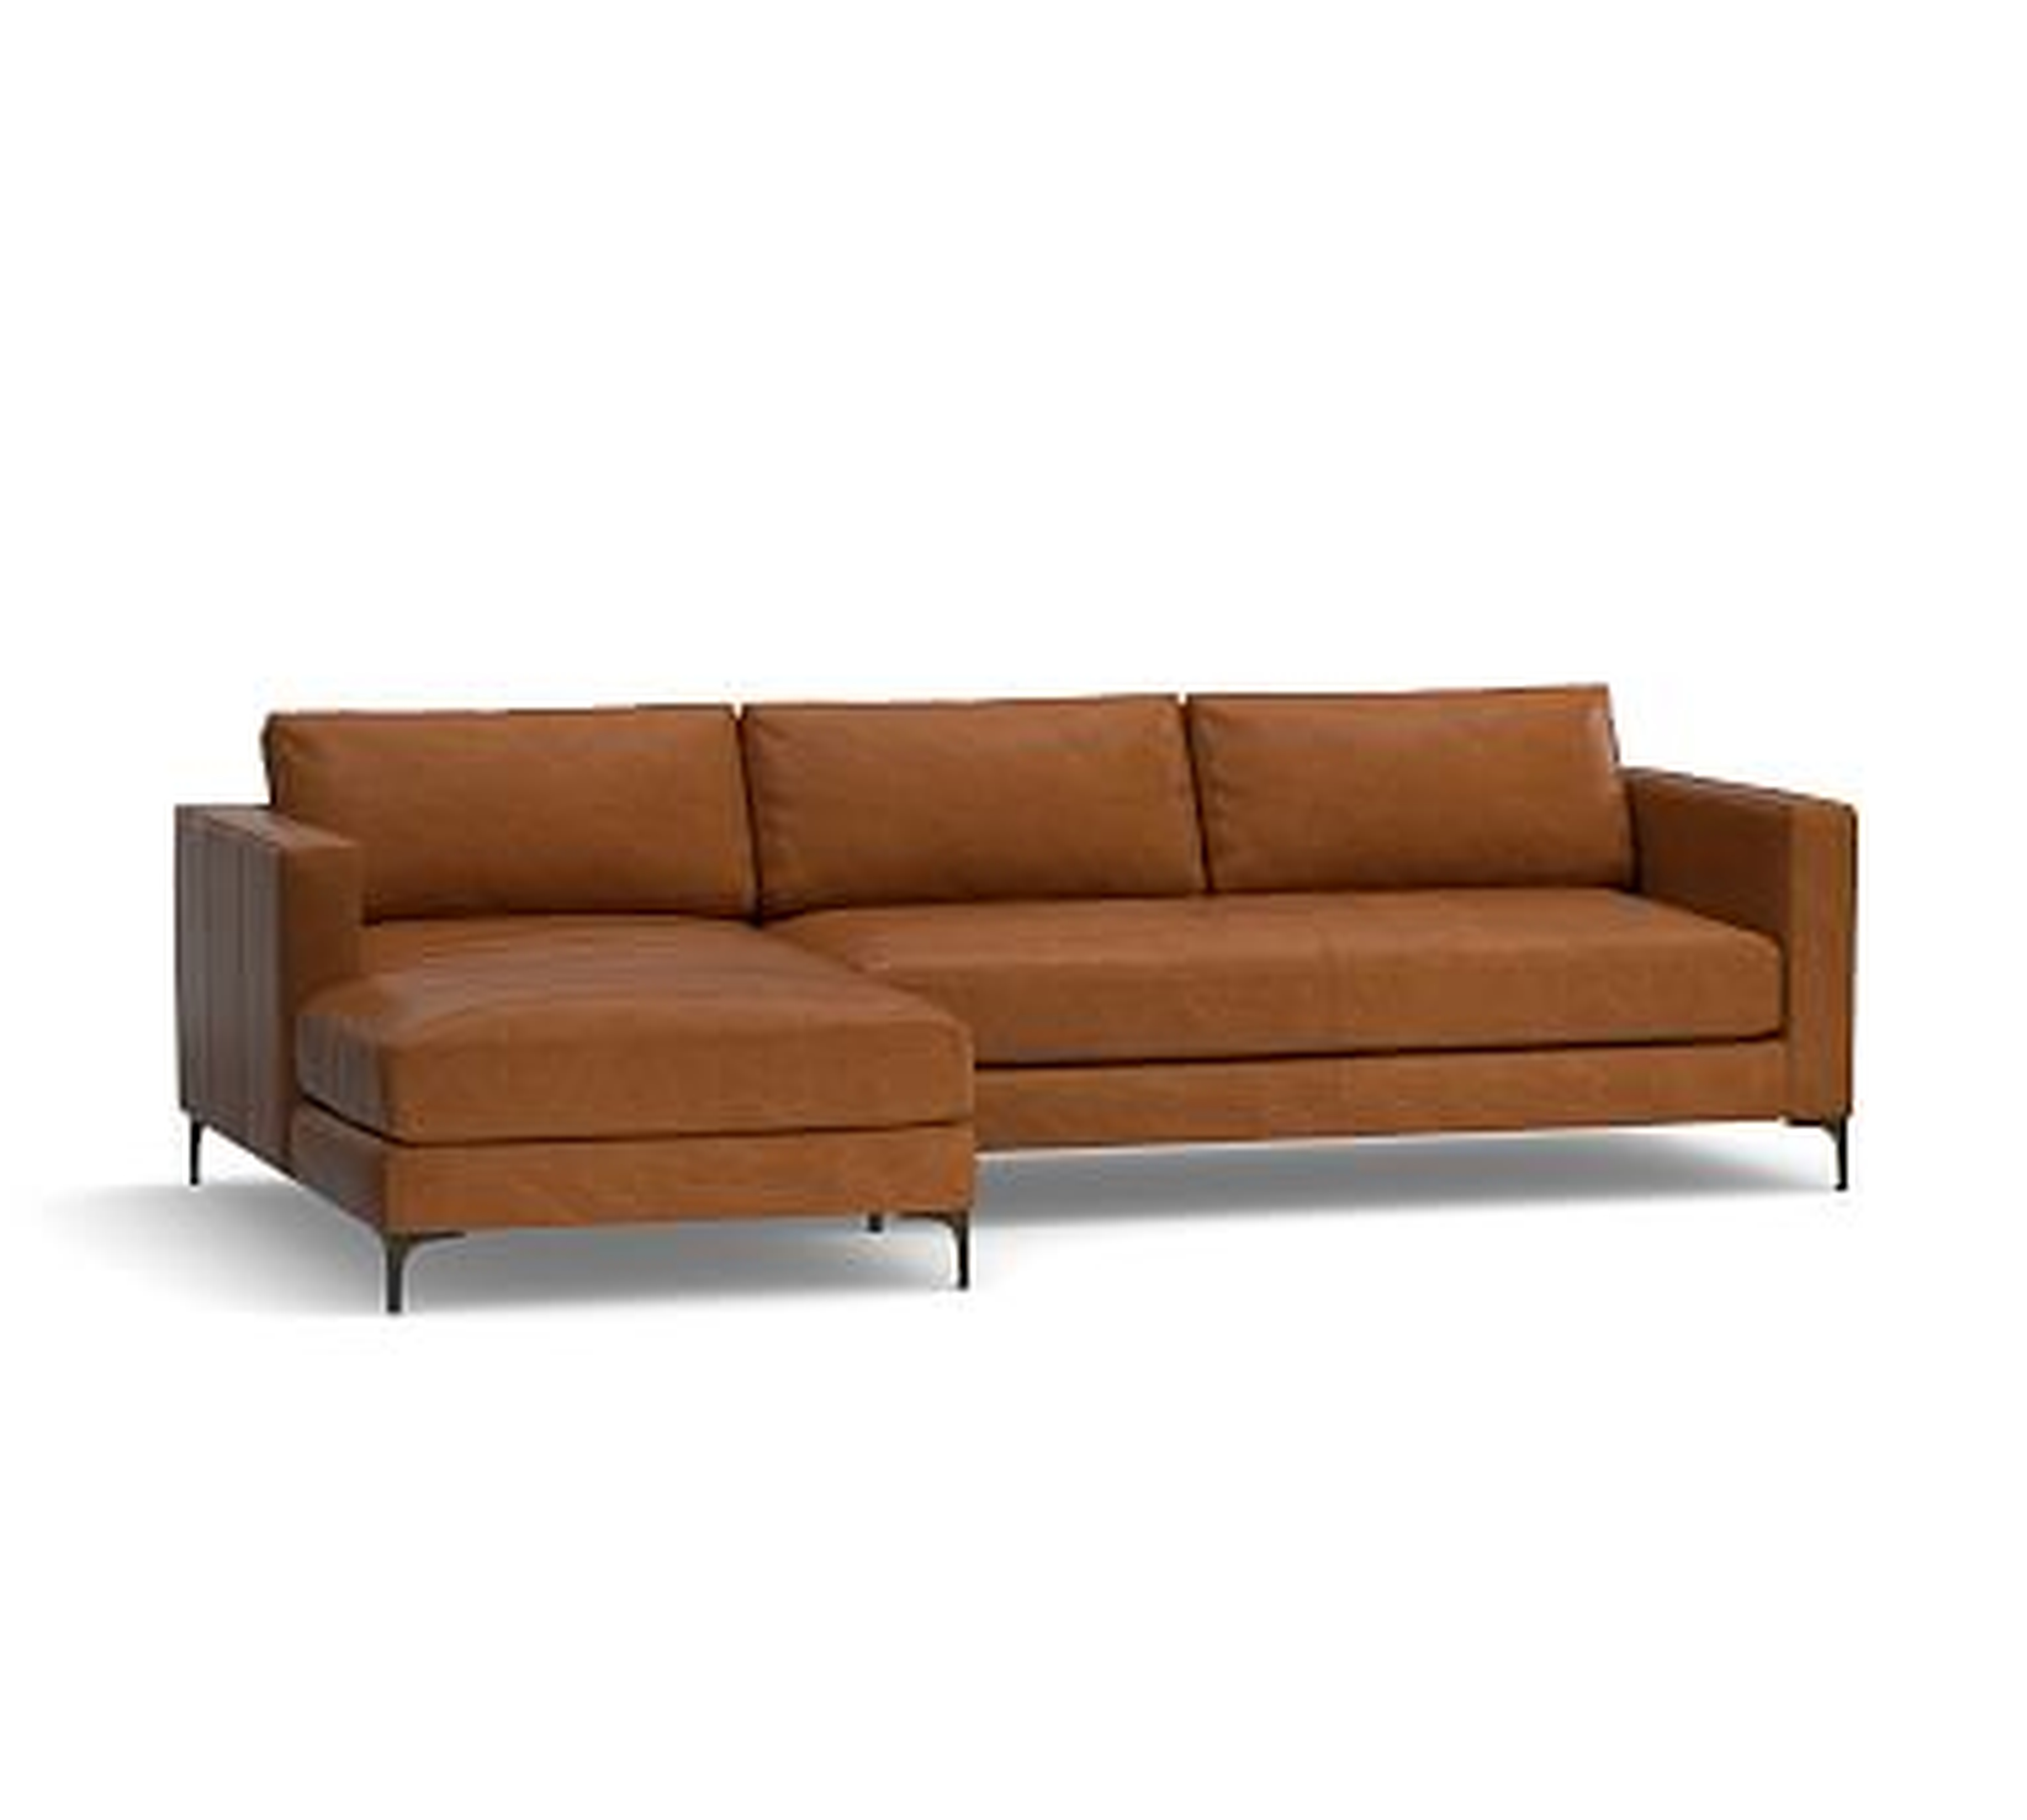 Jake Leather Right Arm Loveseat with Chaise Sectional, Bench Cushion and Bronze Legs, Down Blend Wrapped Cushions, Vintage Caramel - Pottery Barn